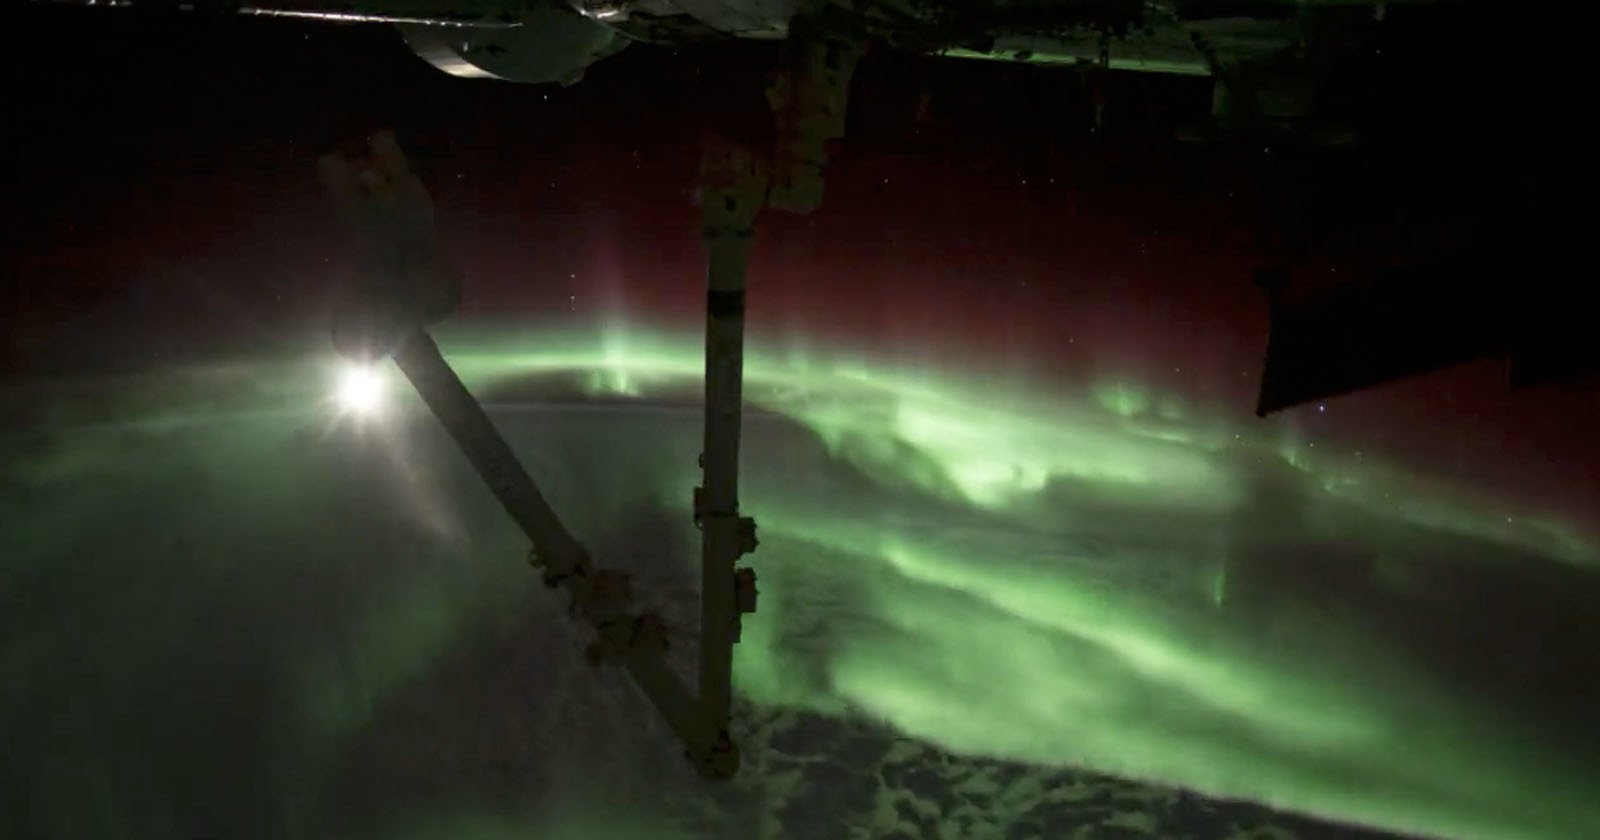  orbital pass video from iss shows aurora moonrise 